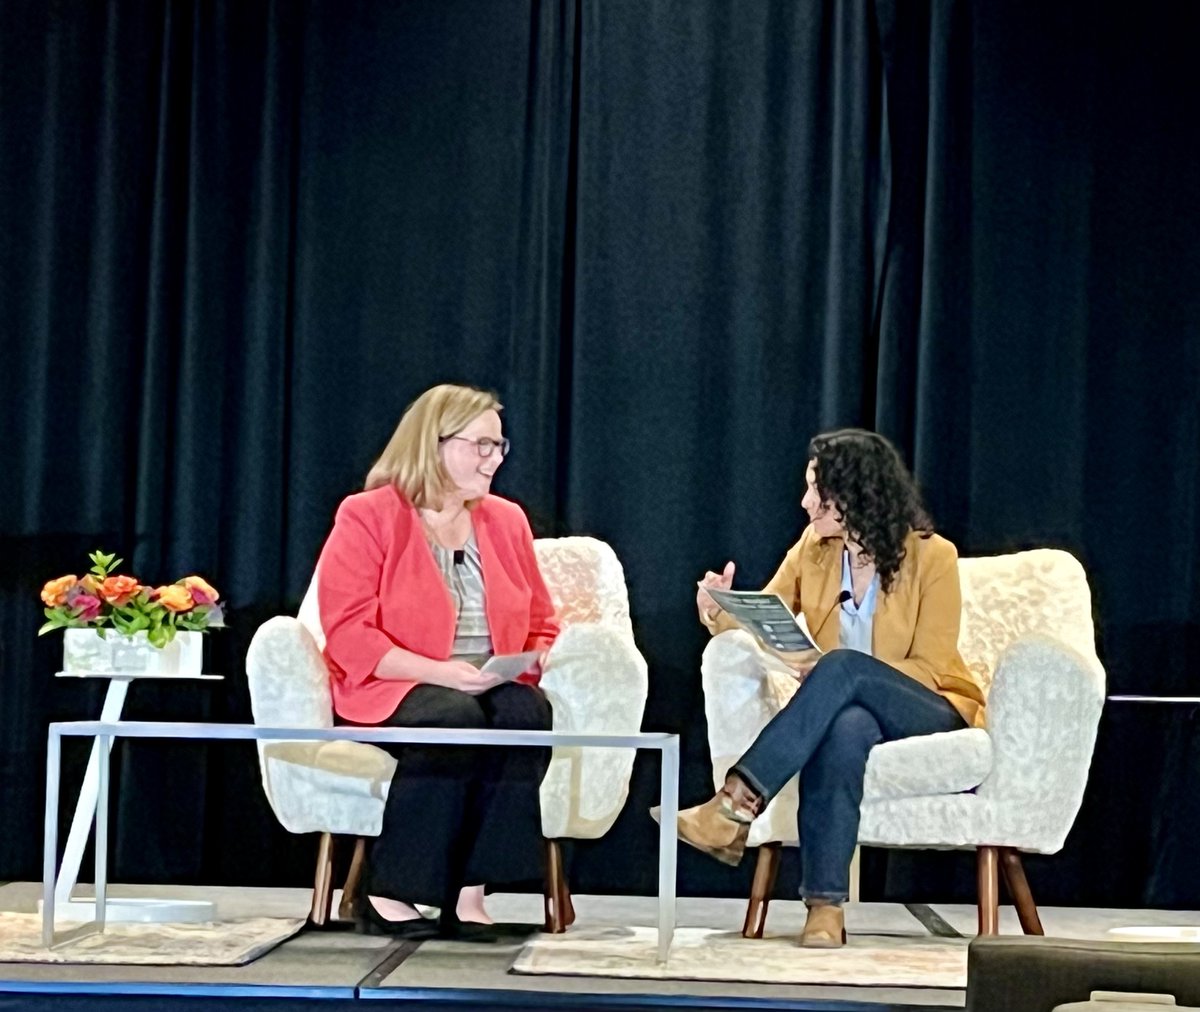 Had a great discussion with my colleague and USDA Under Secretary Jenny Lester Moffitt at @NatProdExpo to highlight today's announcement along with @USDA efforts to maintain, open, and grow markets and reduce and eliminate trade barriers for U.S. organic producers. #ExpoWest